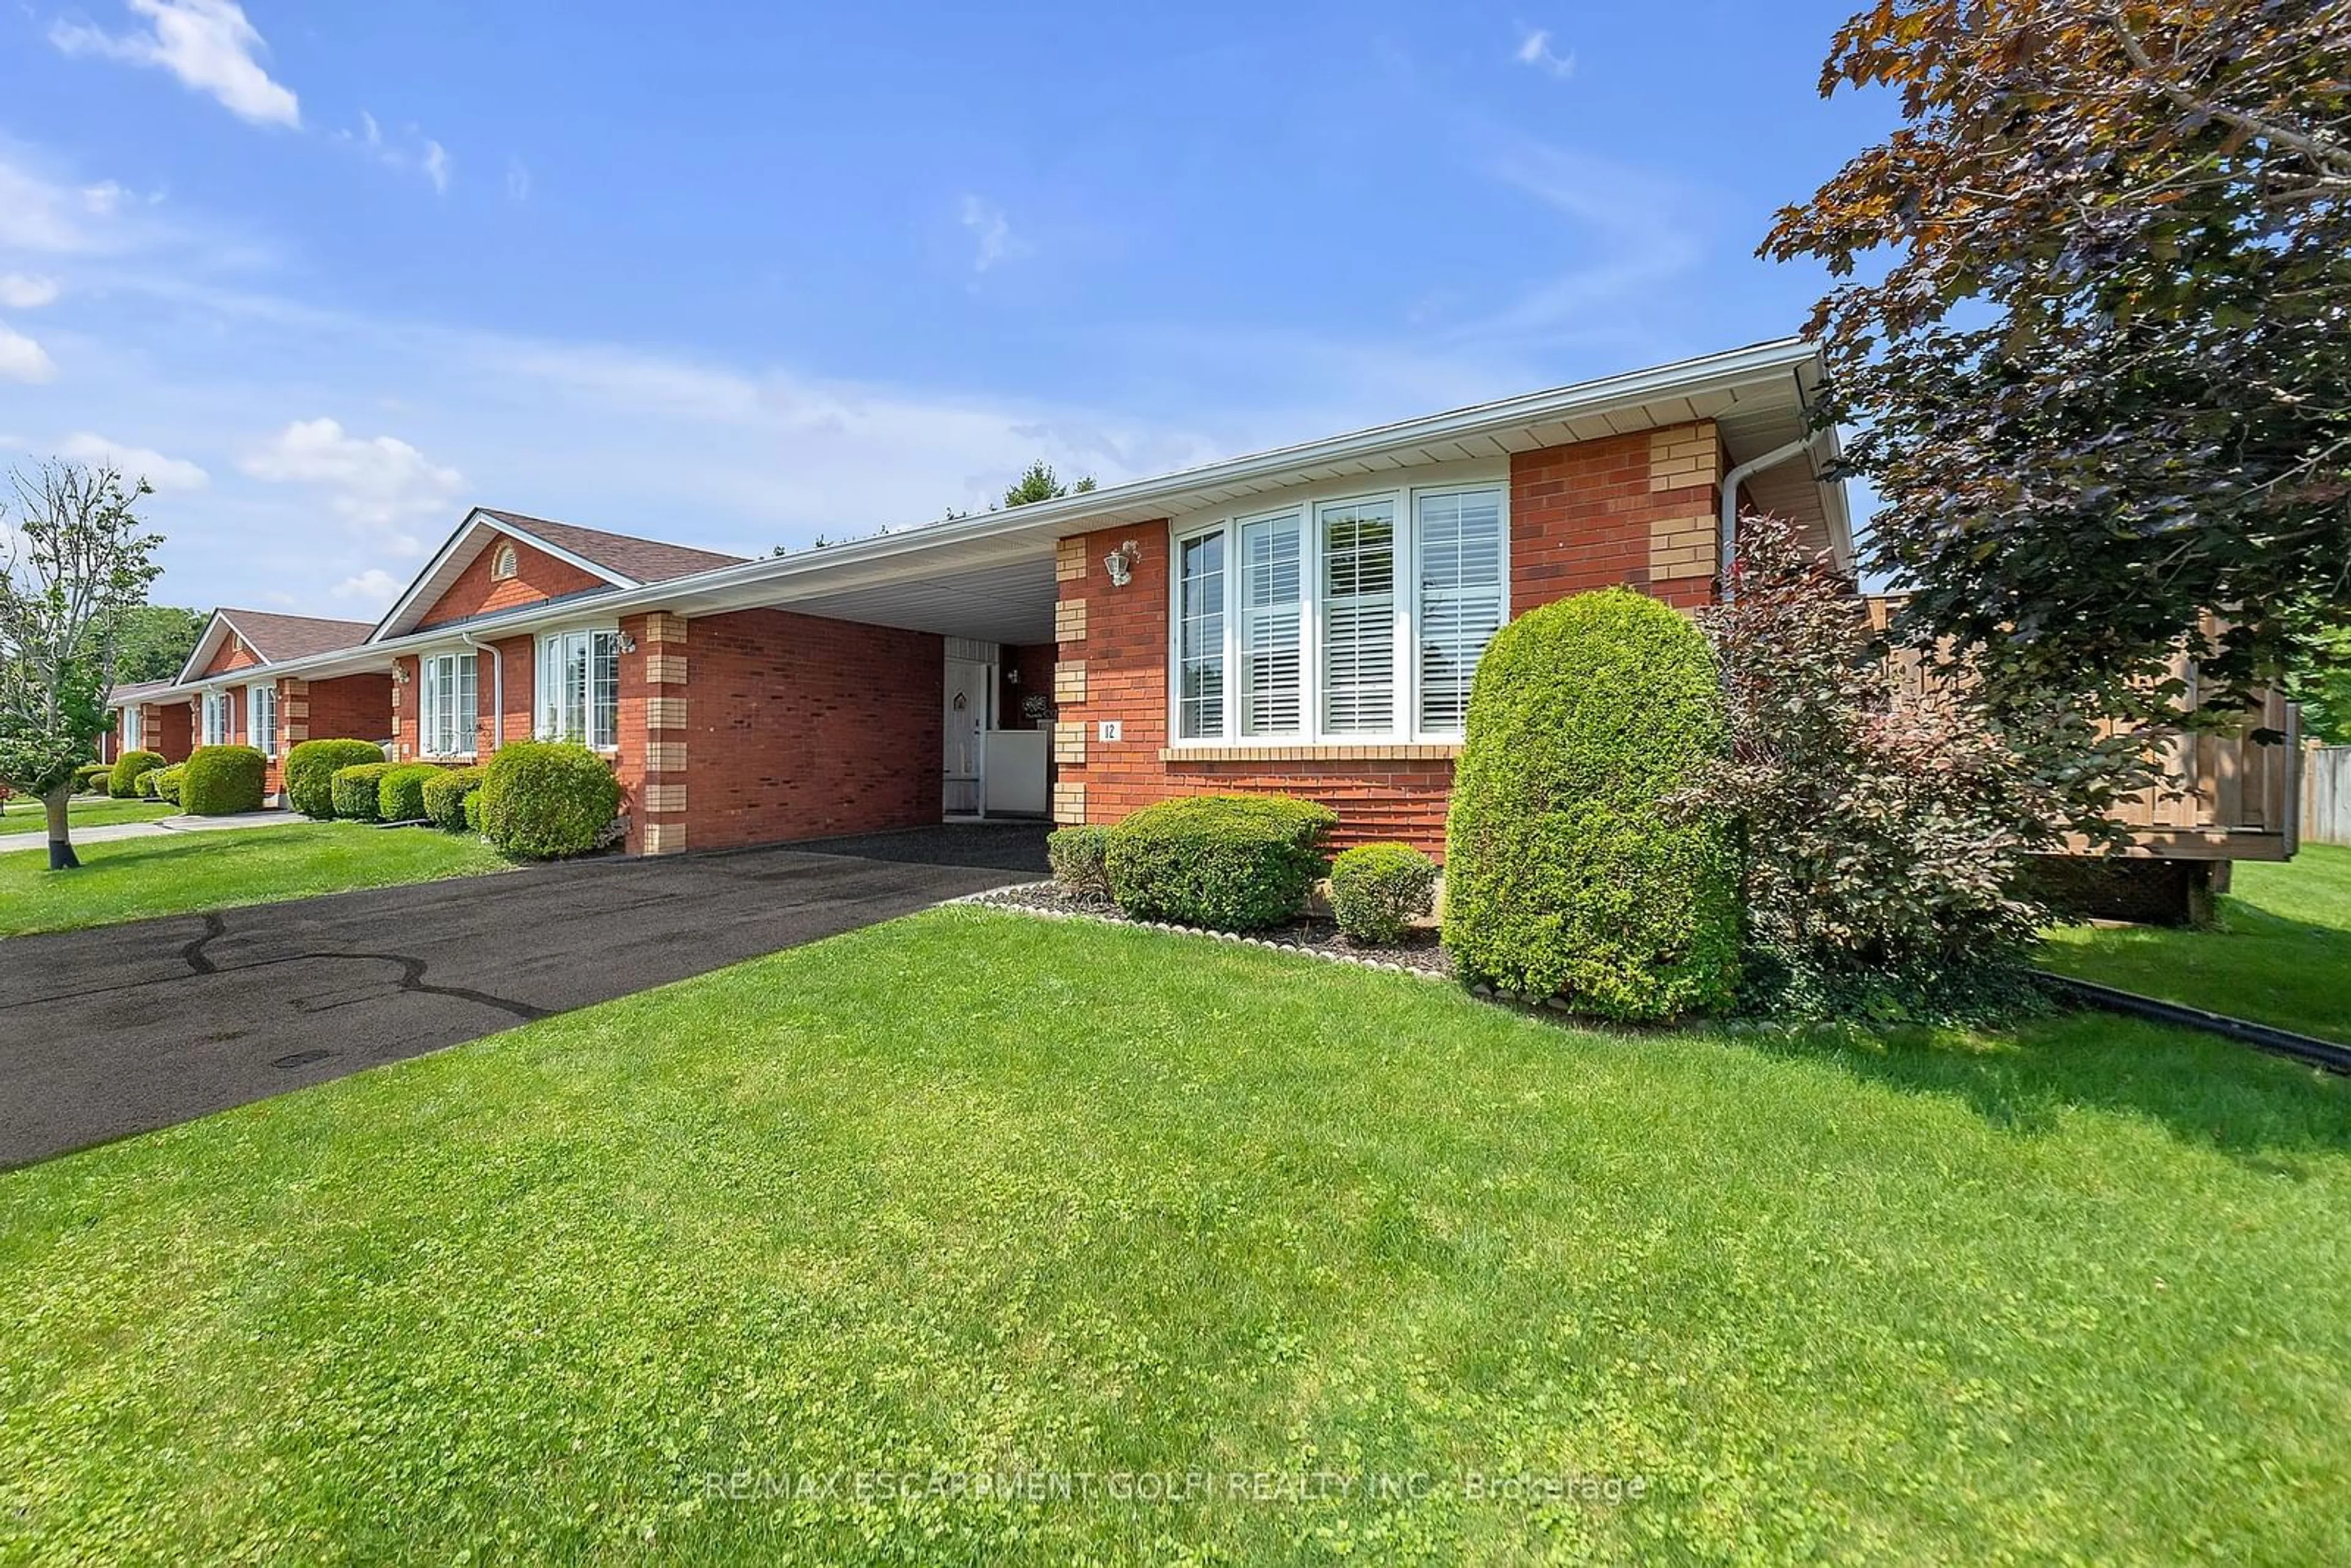 Home with brick exterior material for 20 Courtland Dr #12, Brantford Ontario N3R 7Y2